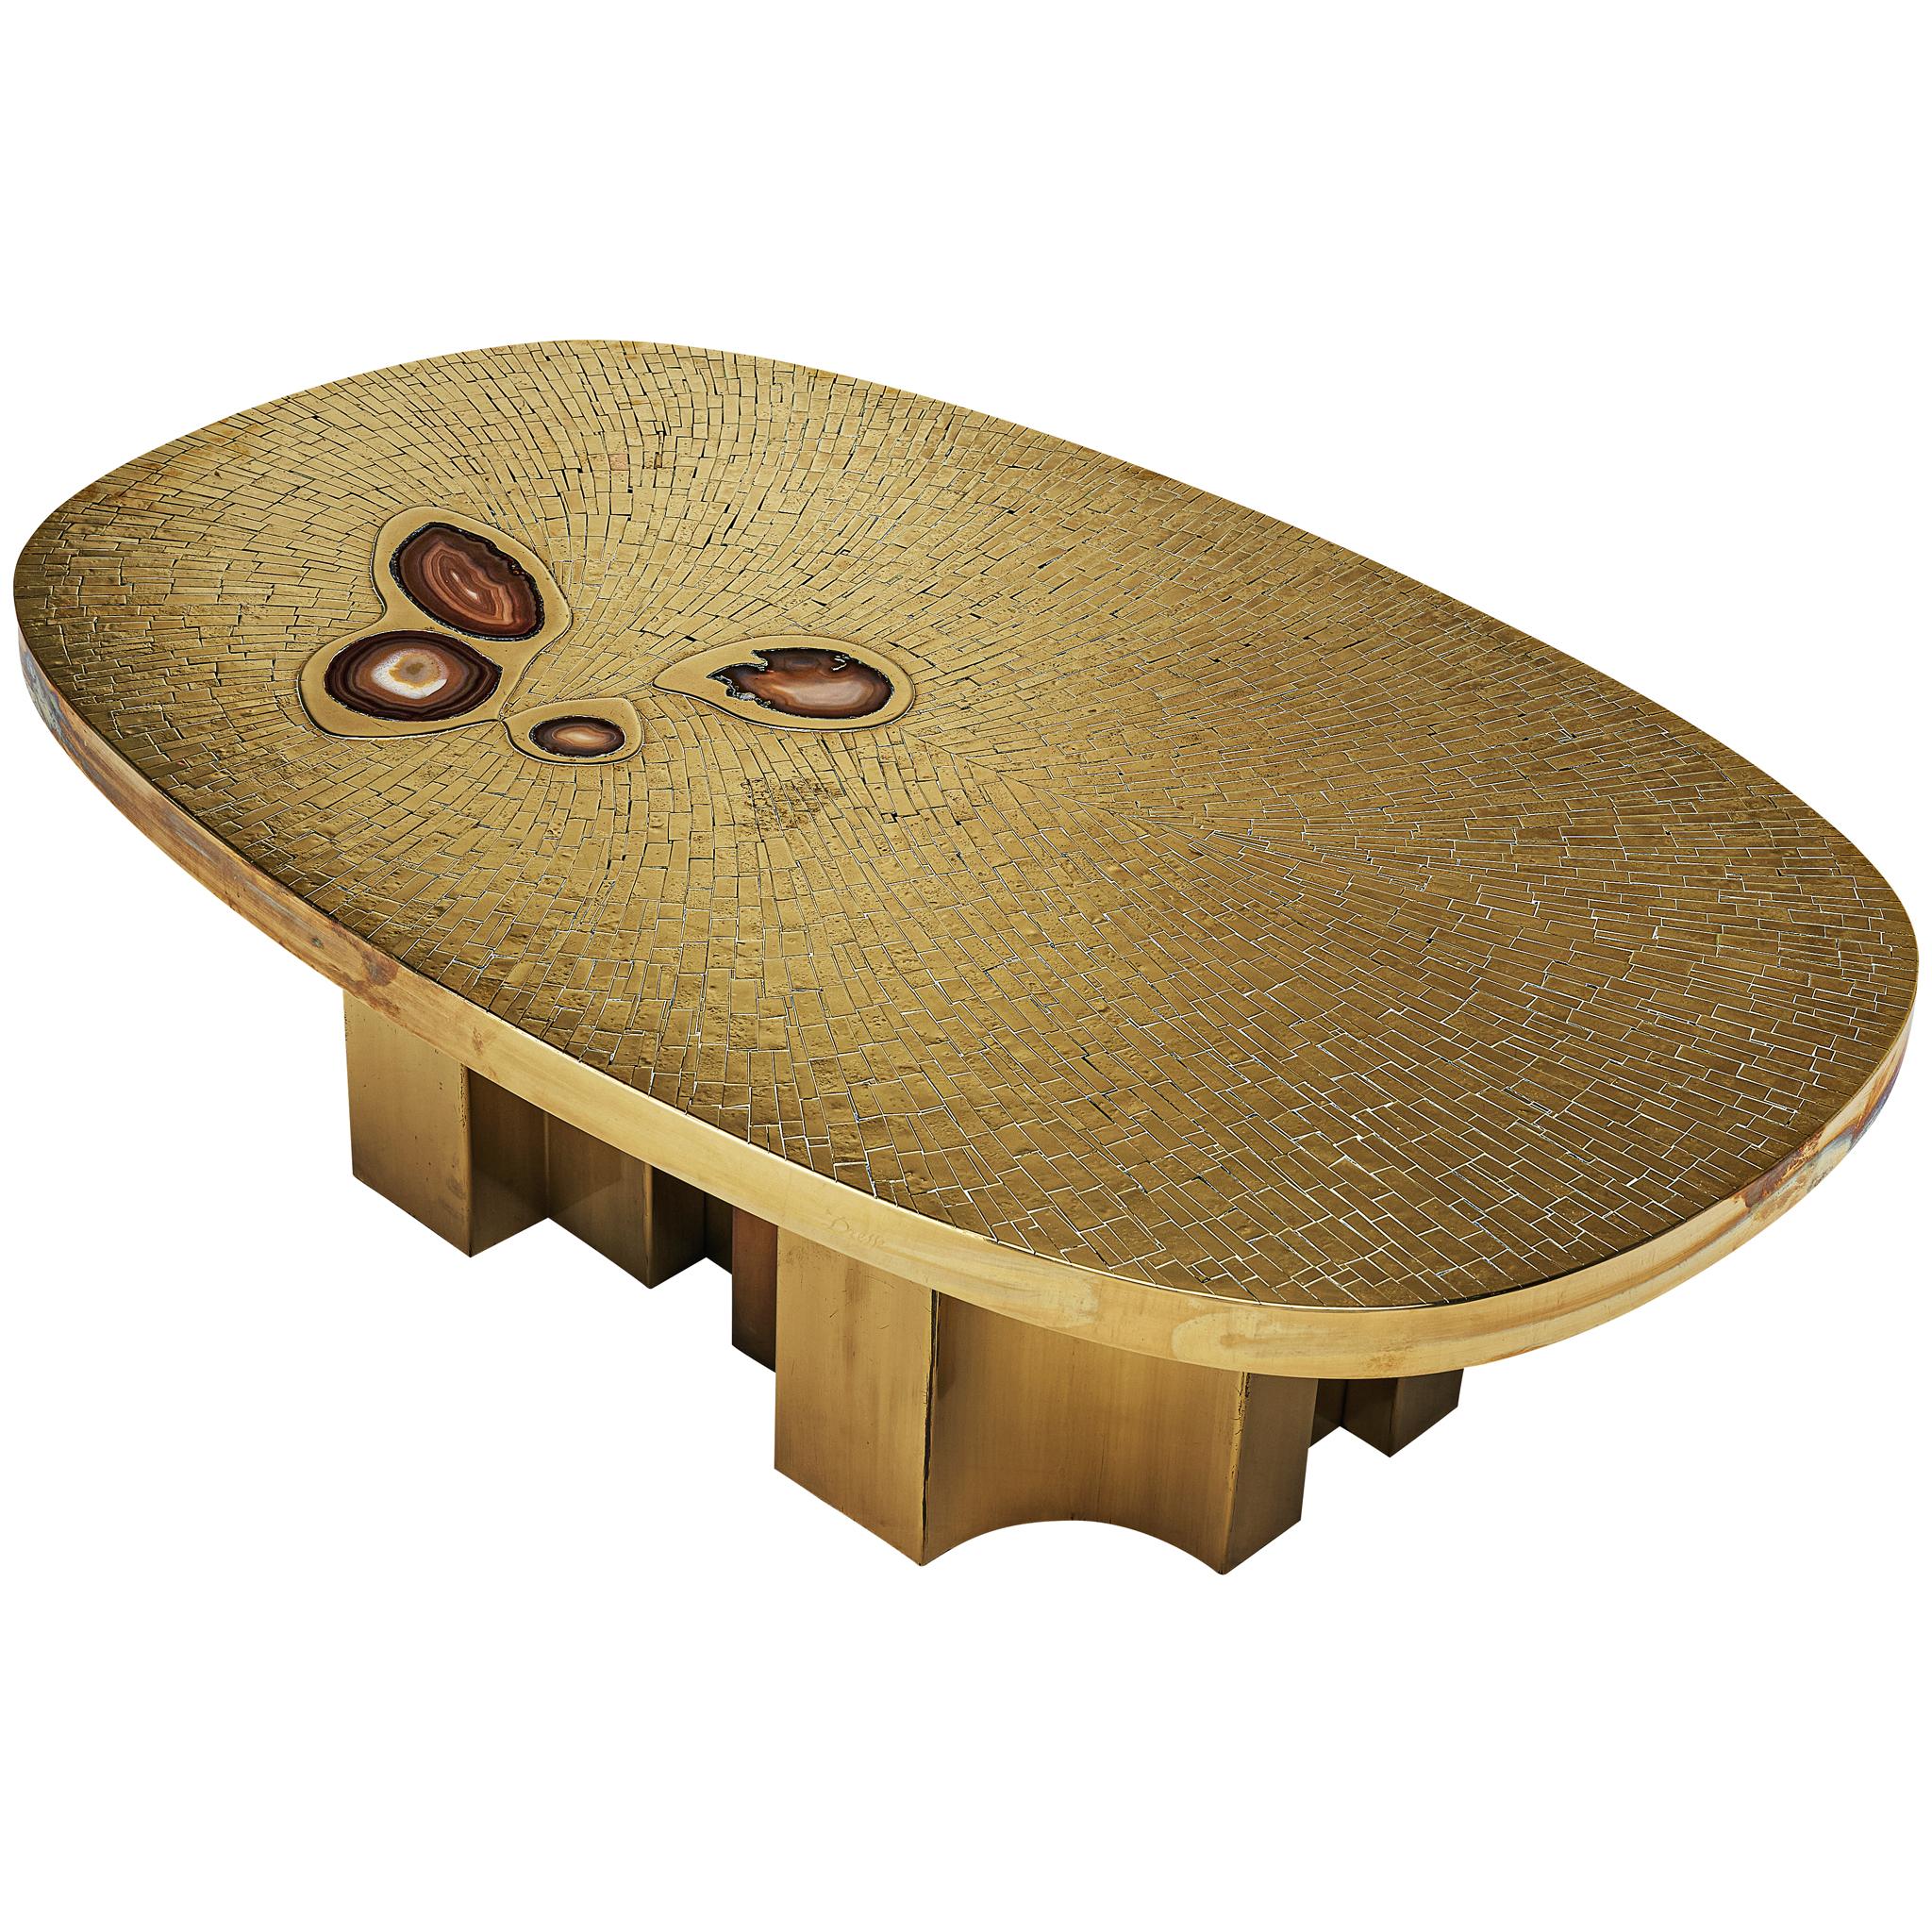 Jean Claude Dresse Oval Coffee Table in Brass Inlayed with Agate